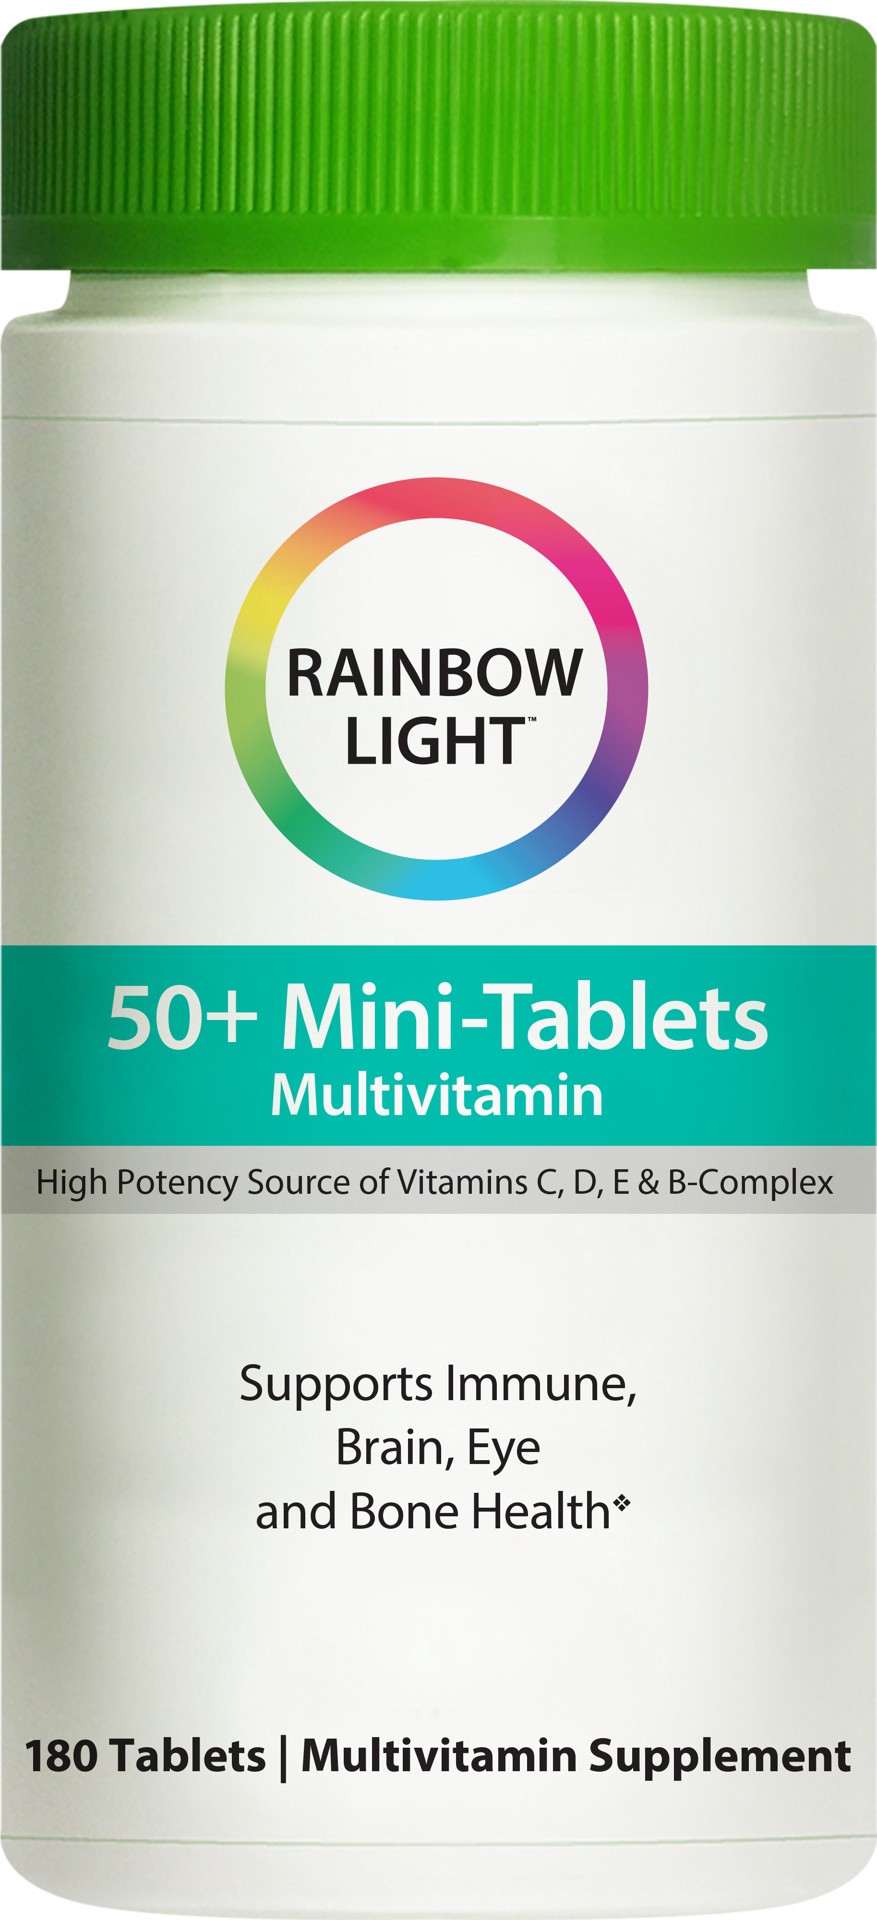 slide 1 of 10, Rainbow Light 50+ Mini Tablets Multivitamin for Adults, Supports Immune, Brain, Eye and Bone Health, 180 Count, 1 Bottle, 180 ct